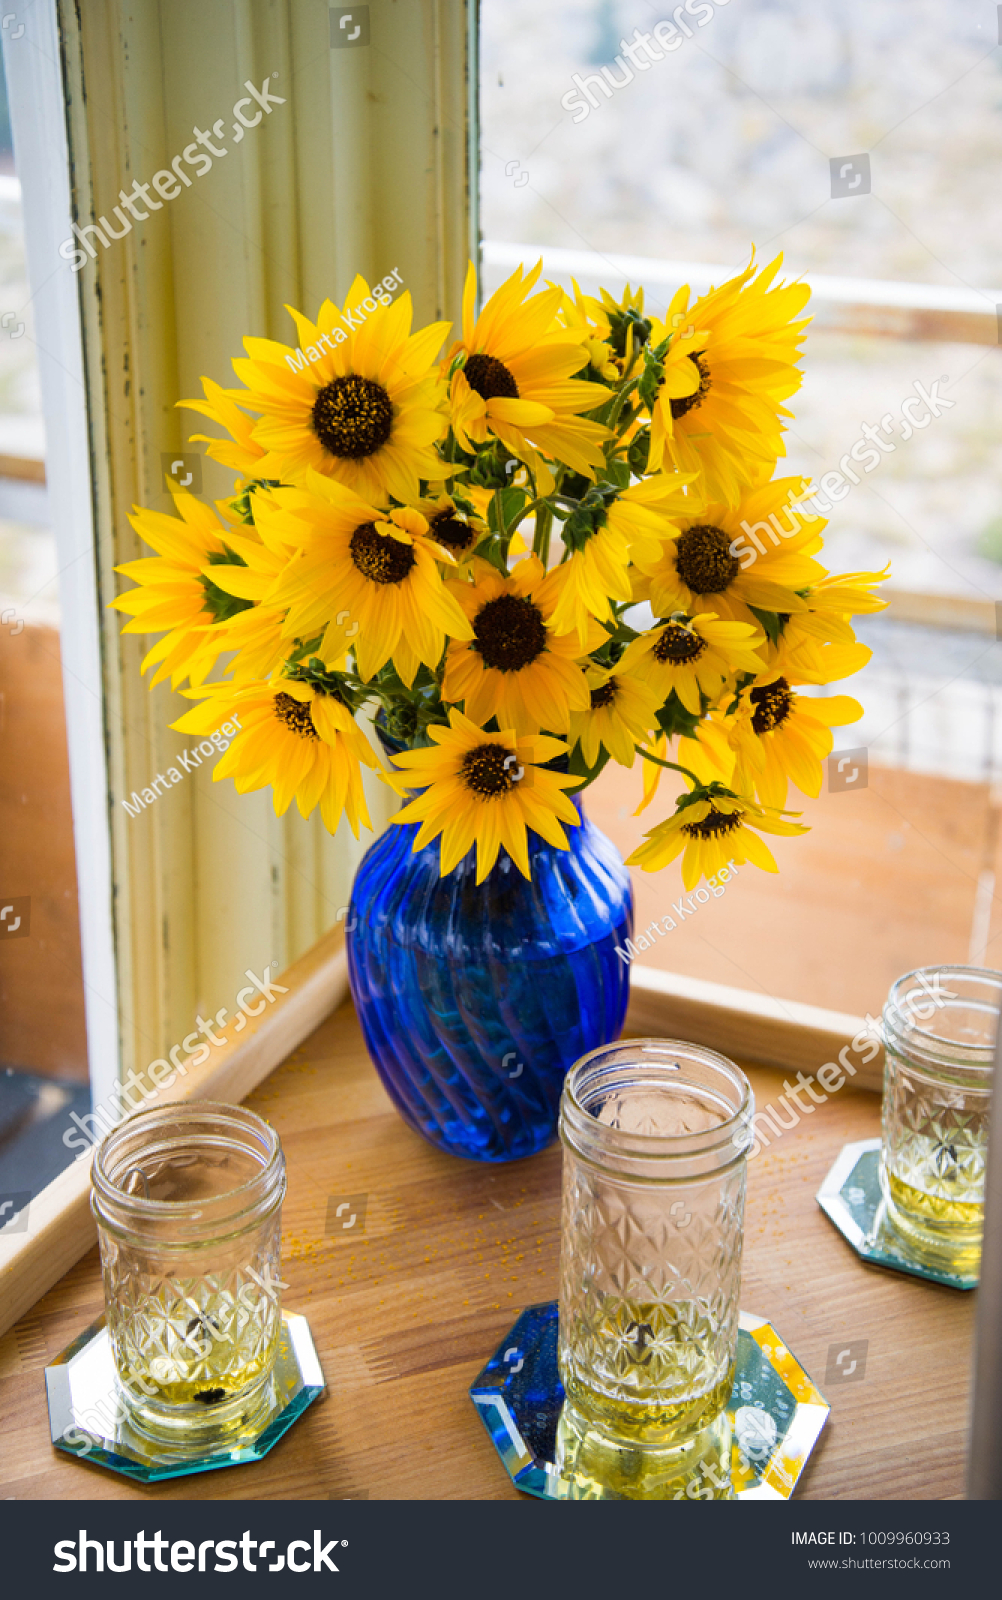 Black Eyed Susan Bouquet Candles Objects Stock Image 1009960933